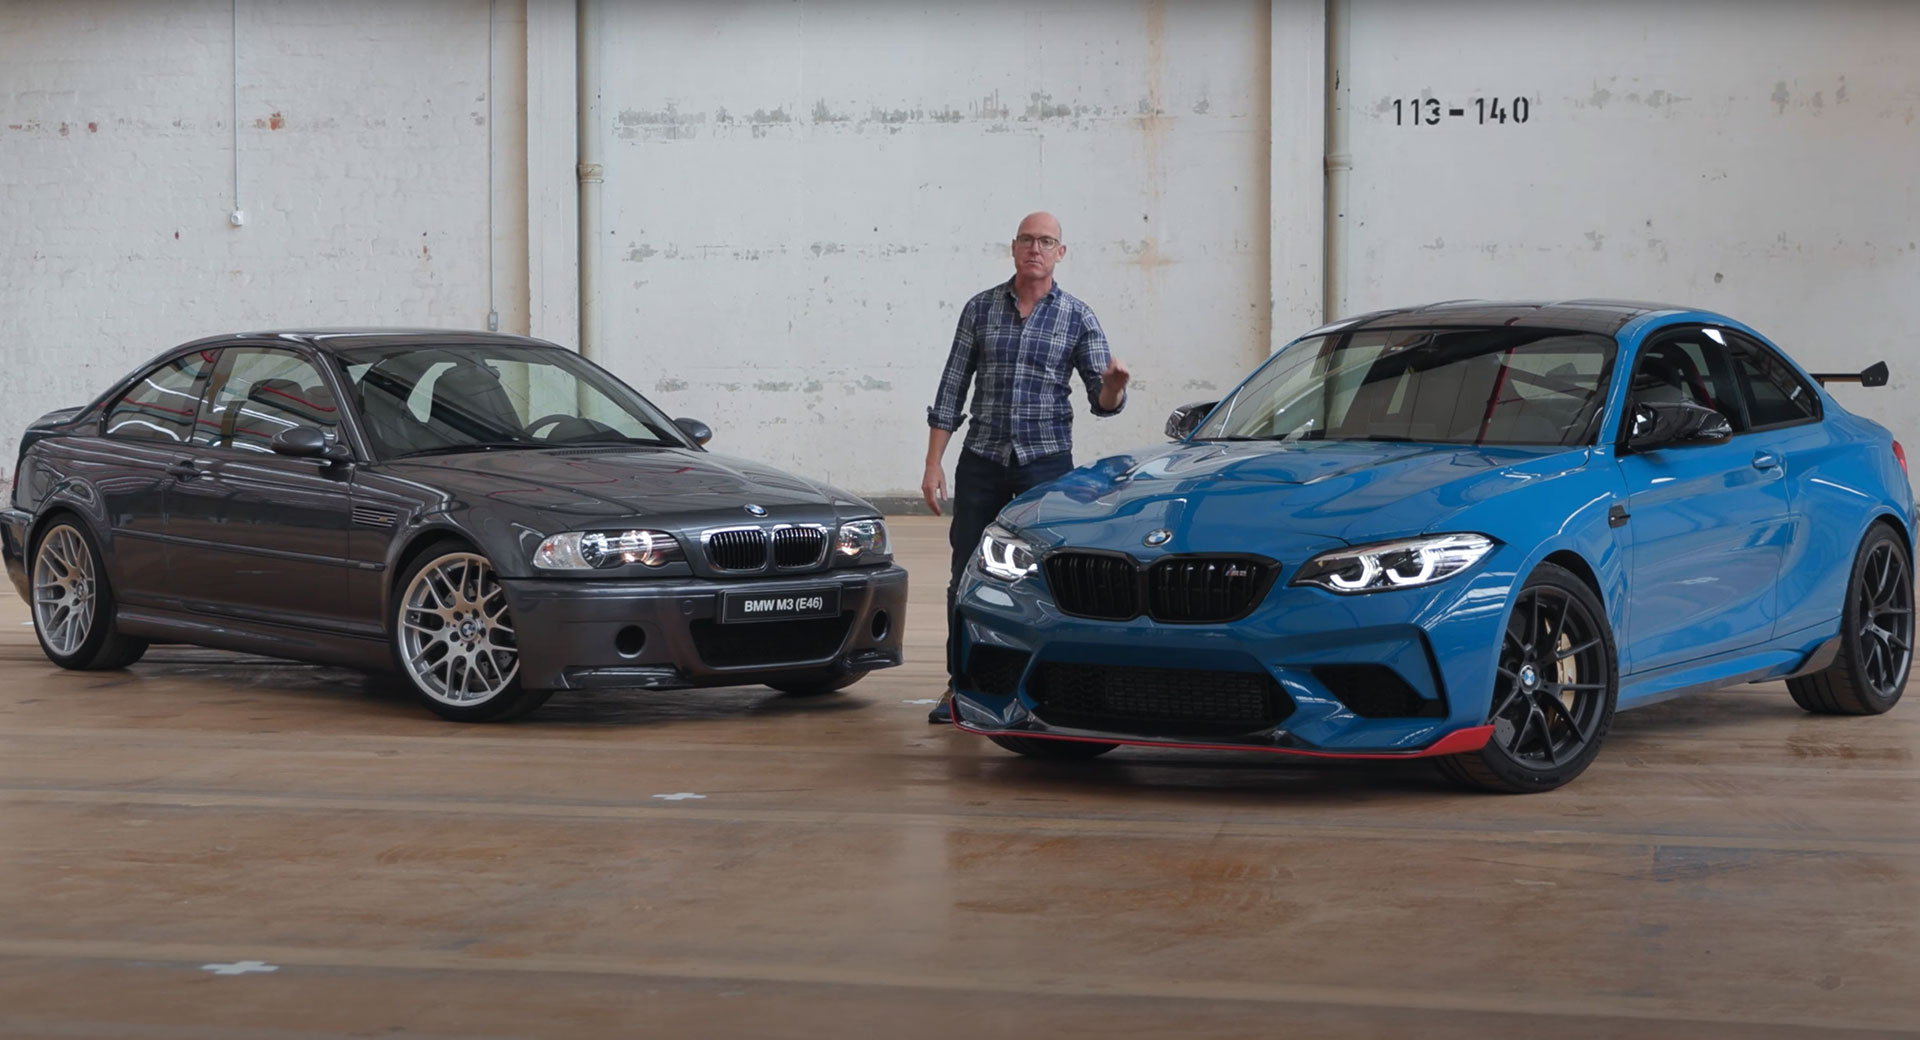 This is the secret BMW M2 CSL that has become a reality